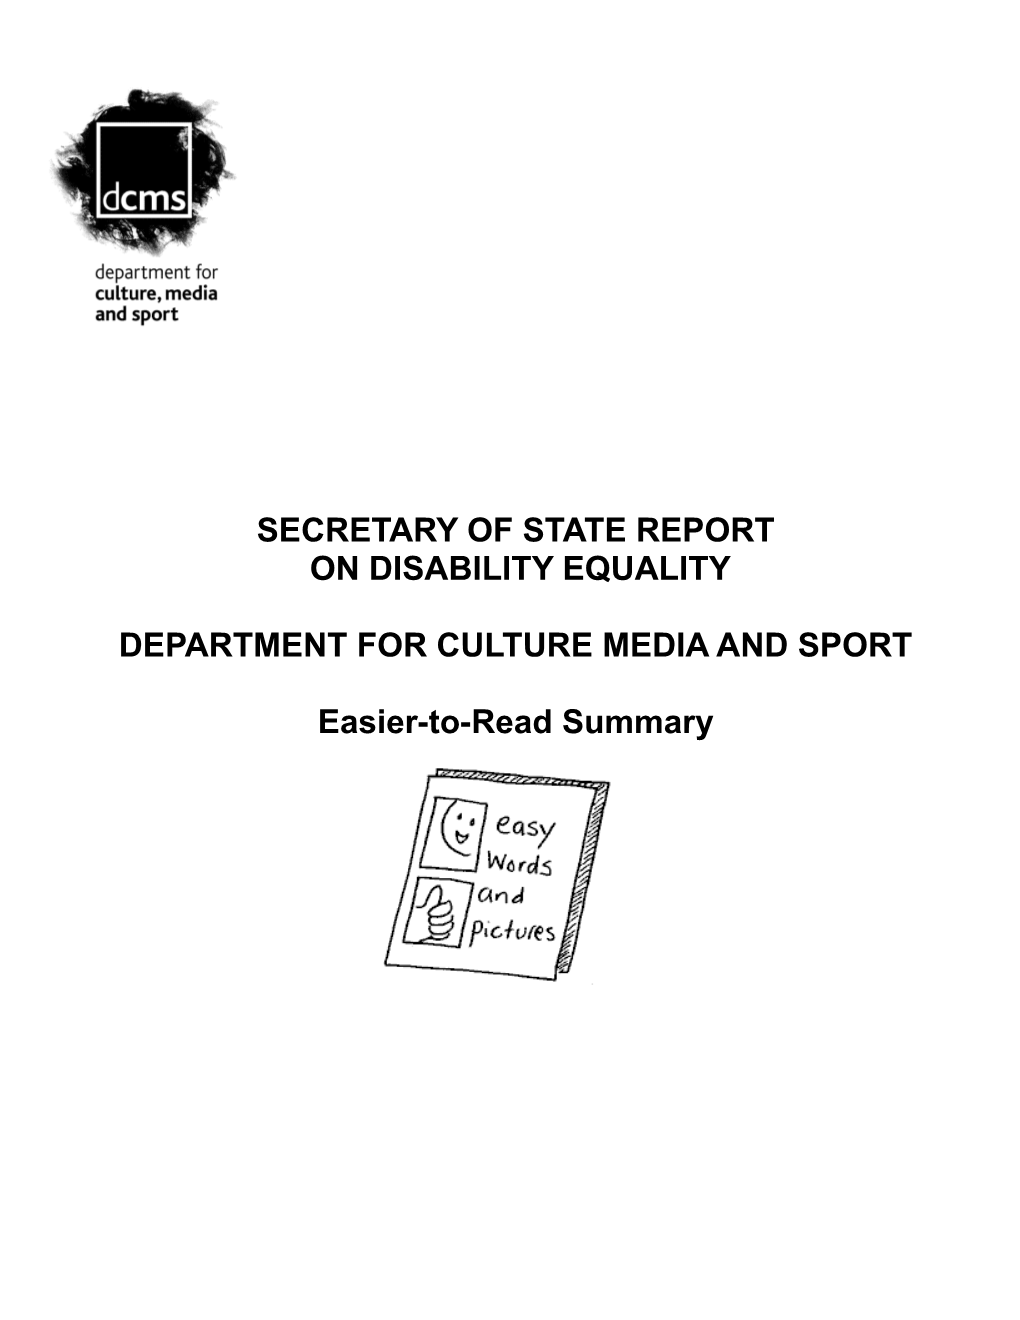 Secretary of State Report - Easier-To-Read Summary